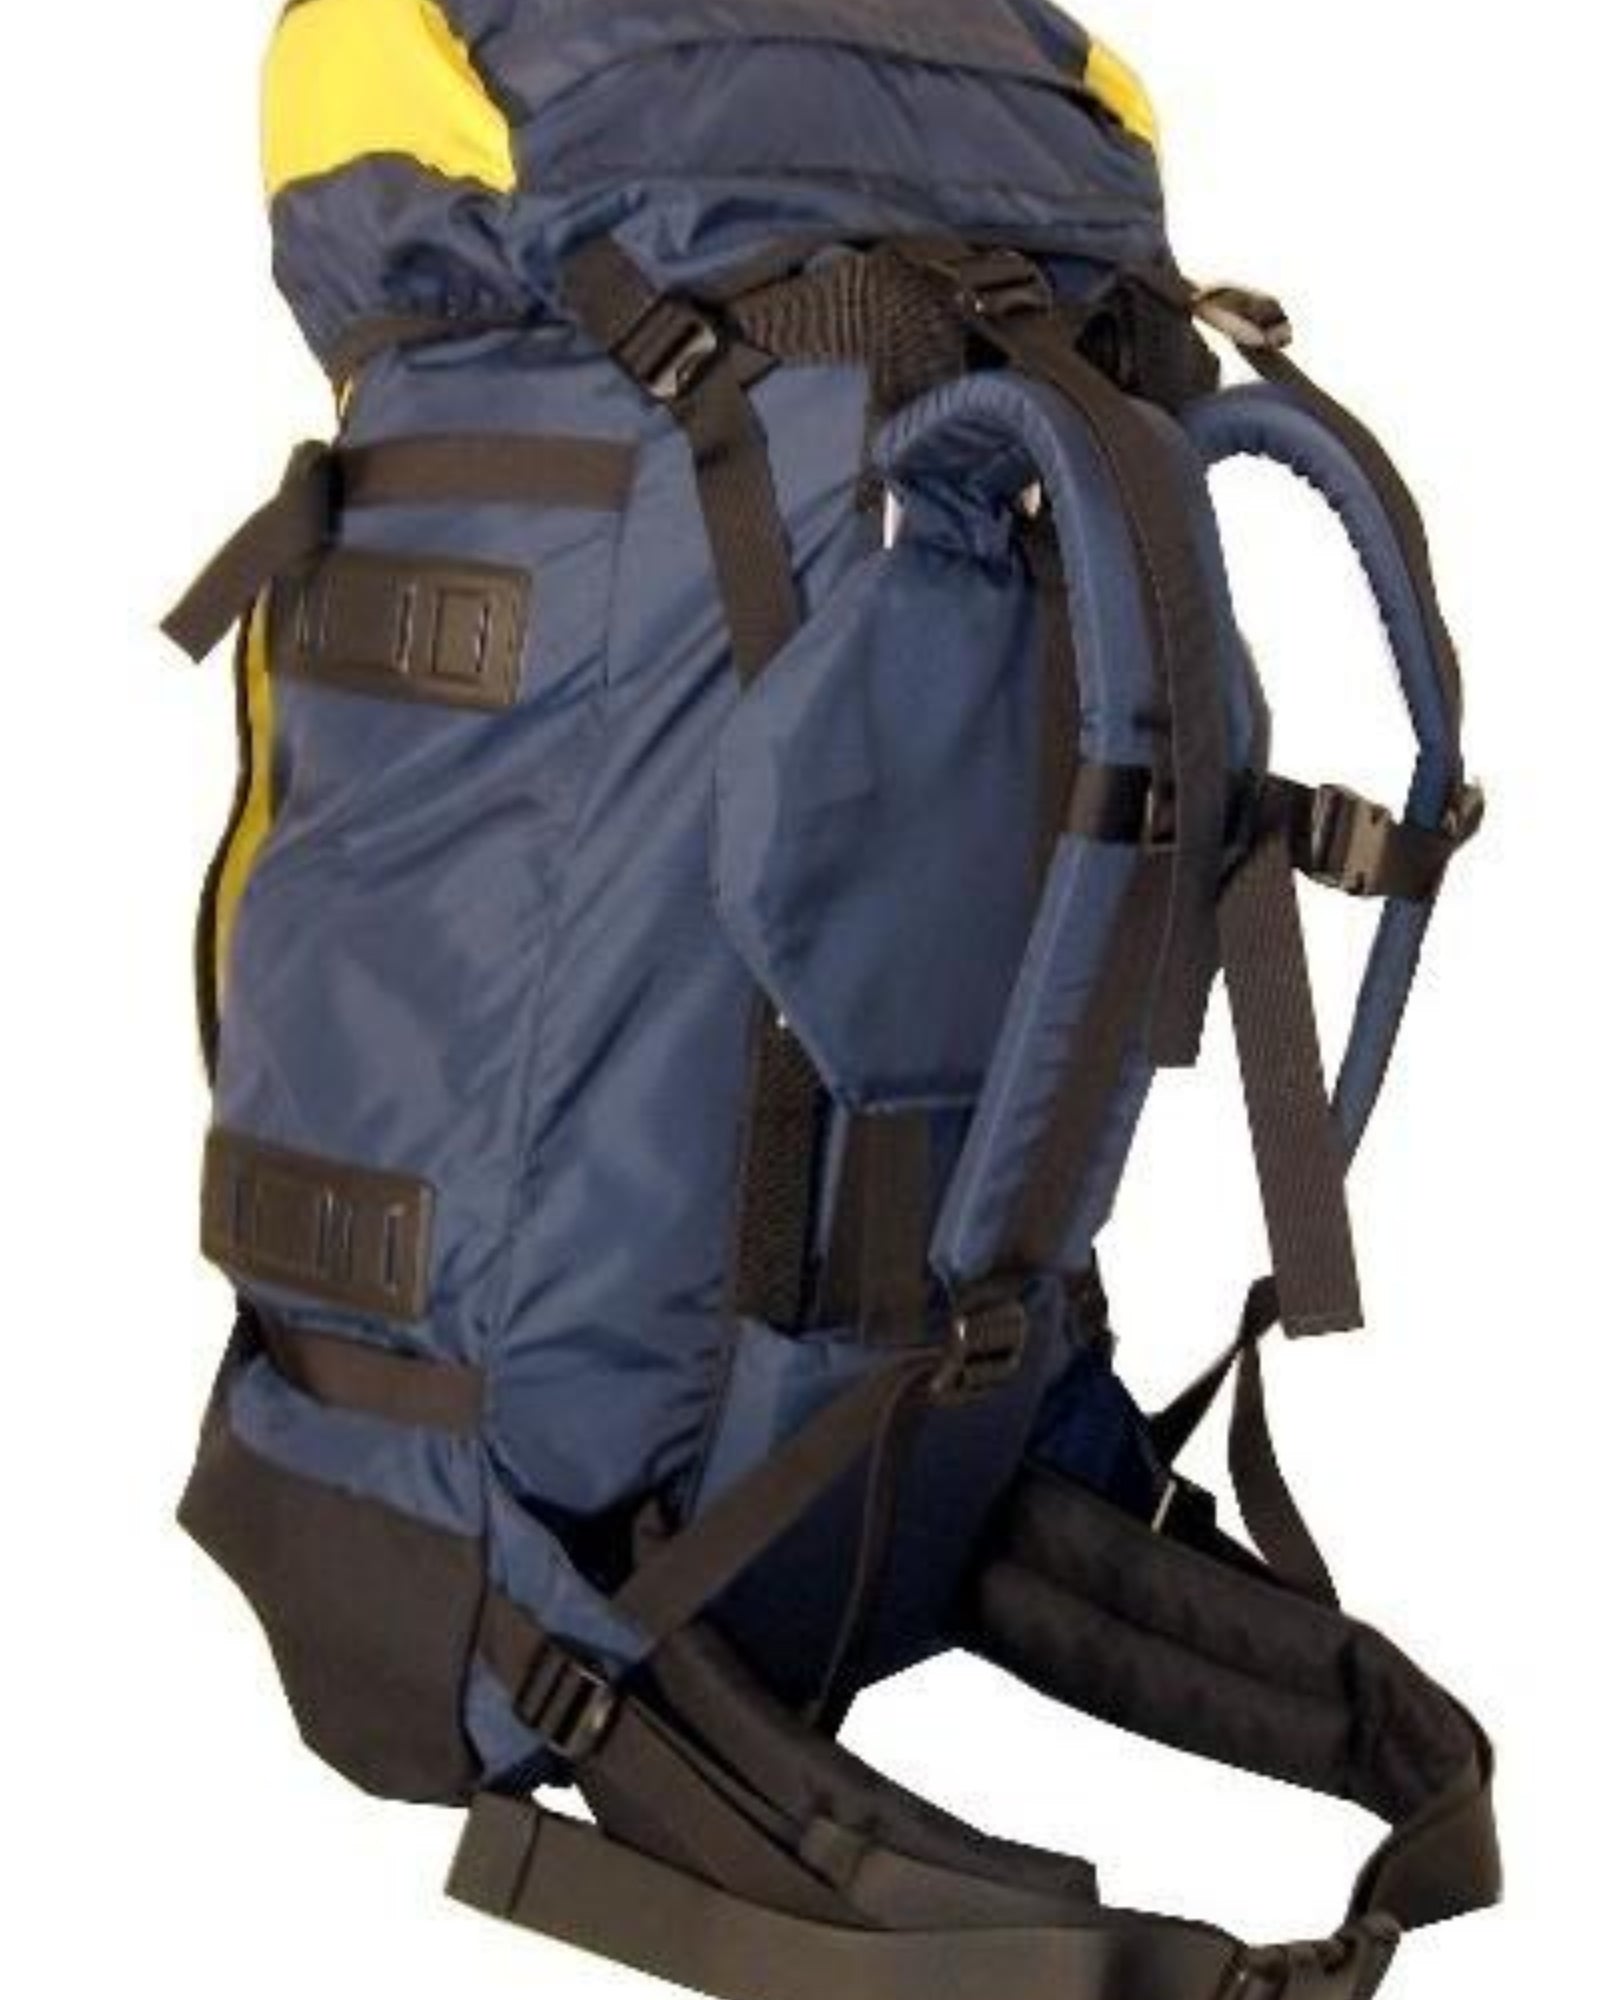 RANGER Hiking Backpack Large Hiking Backpacks, by Tough Traveler. Made in USA since 1970